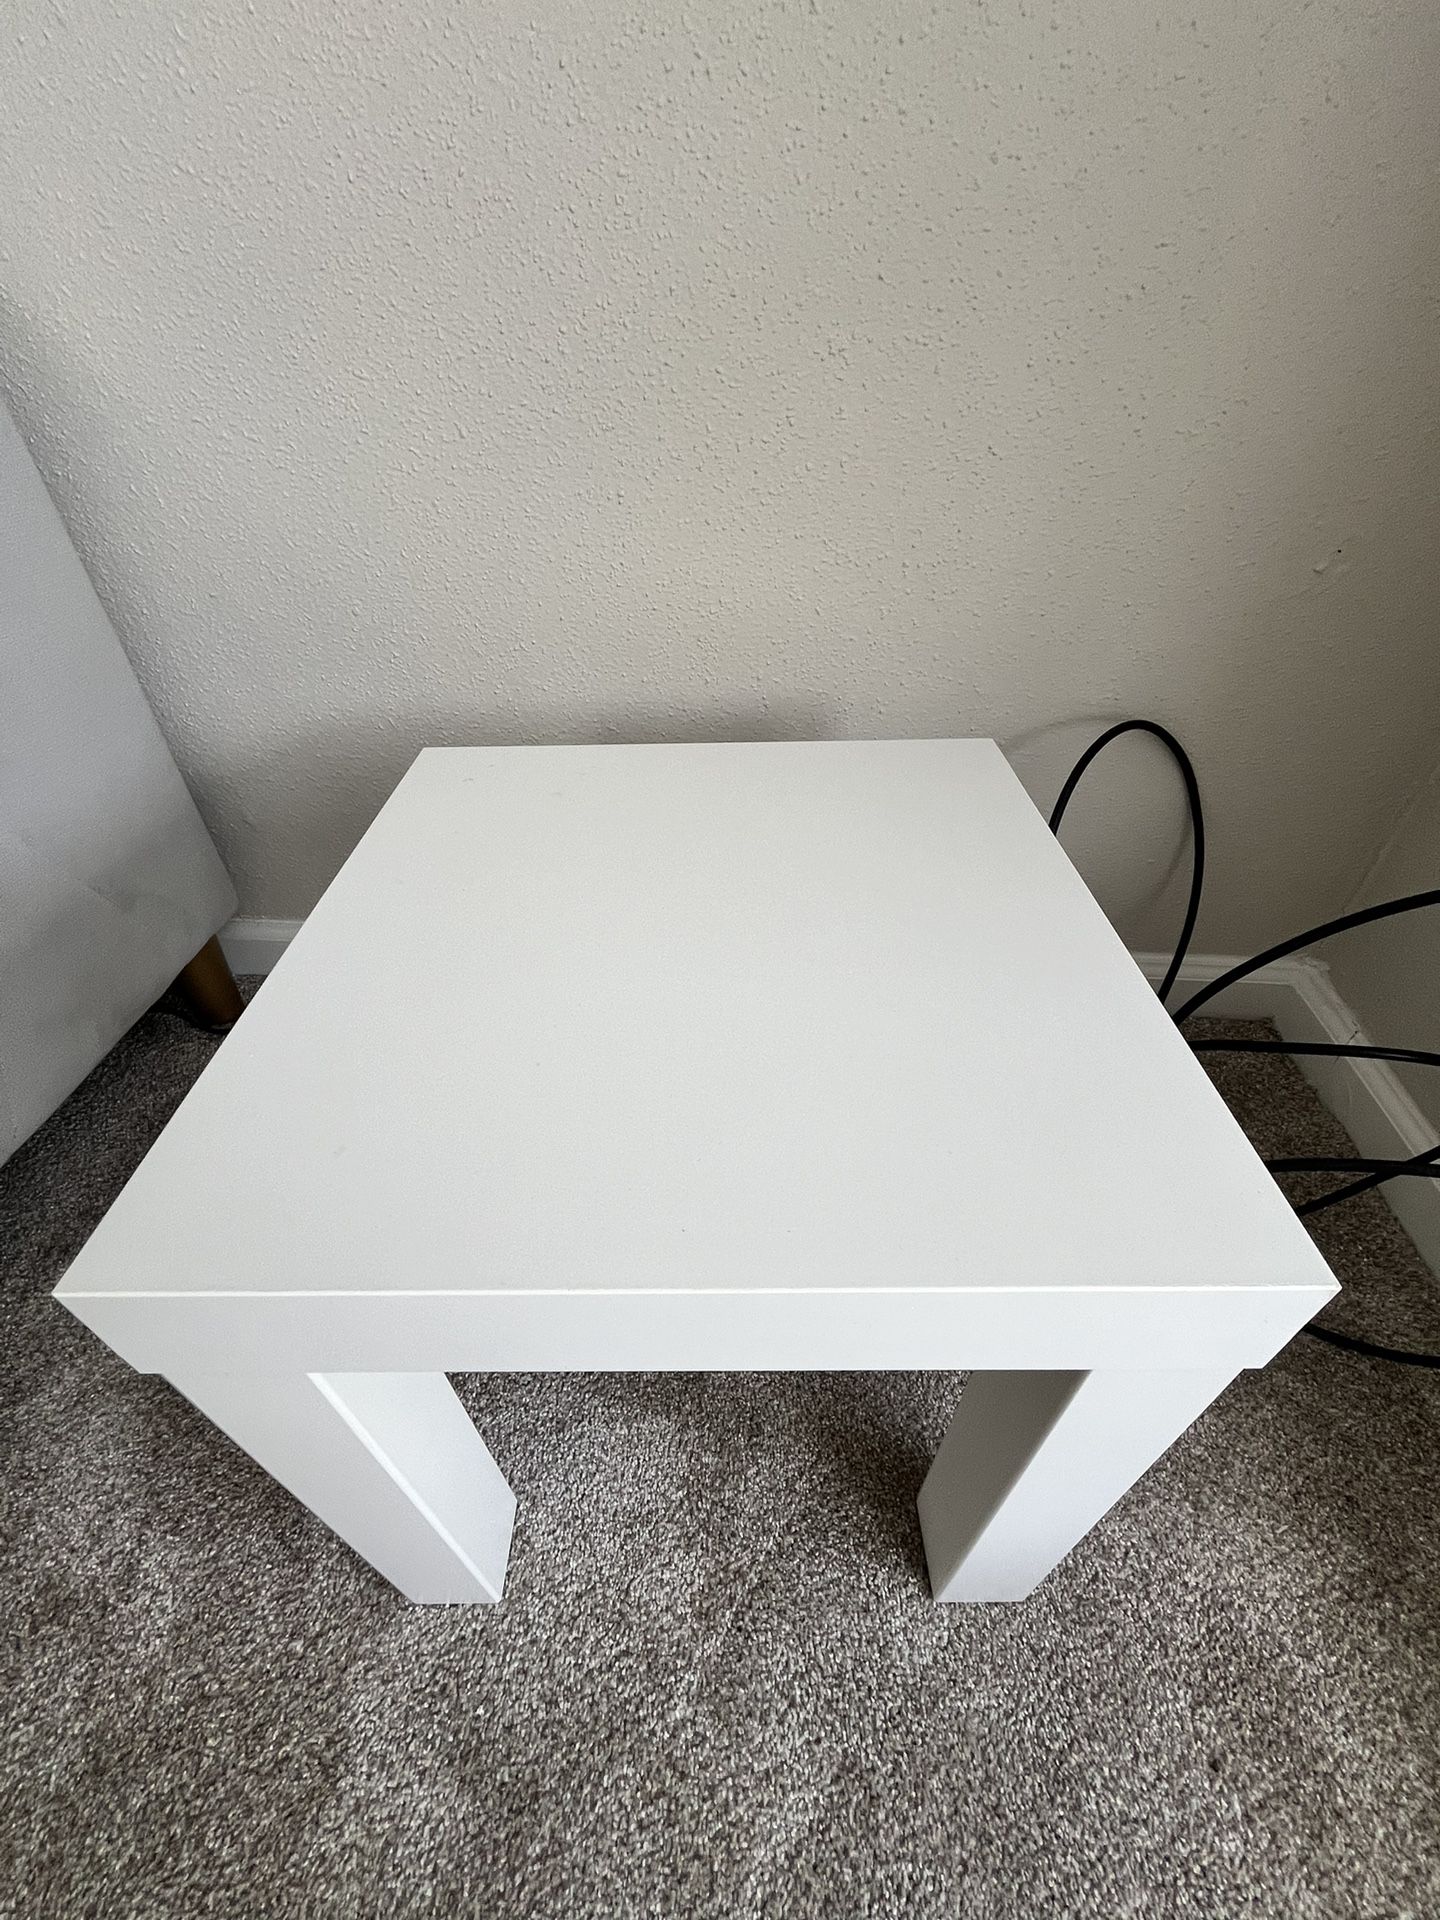 White nightstand. Small size 